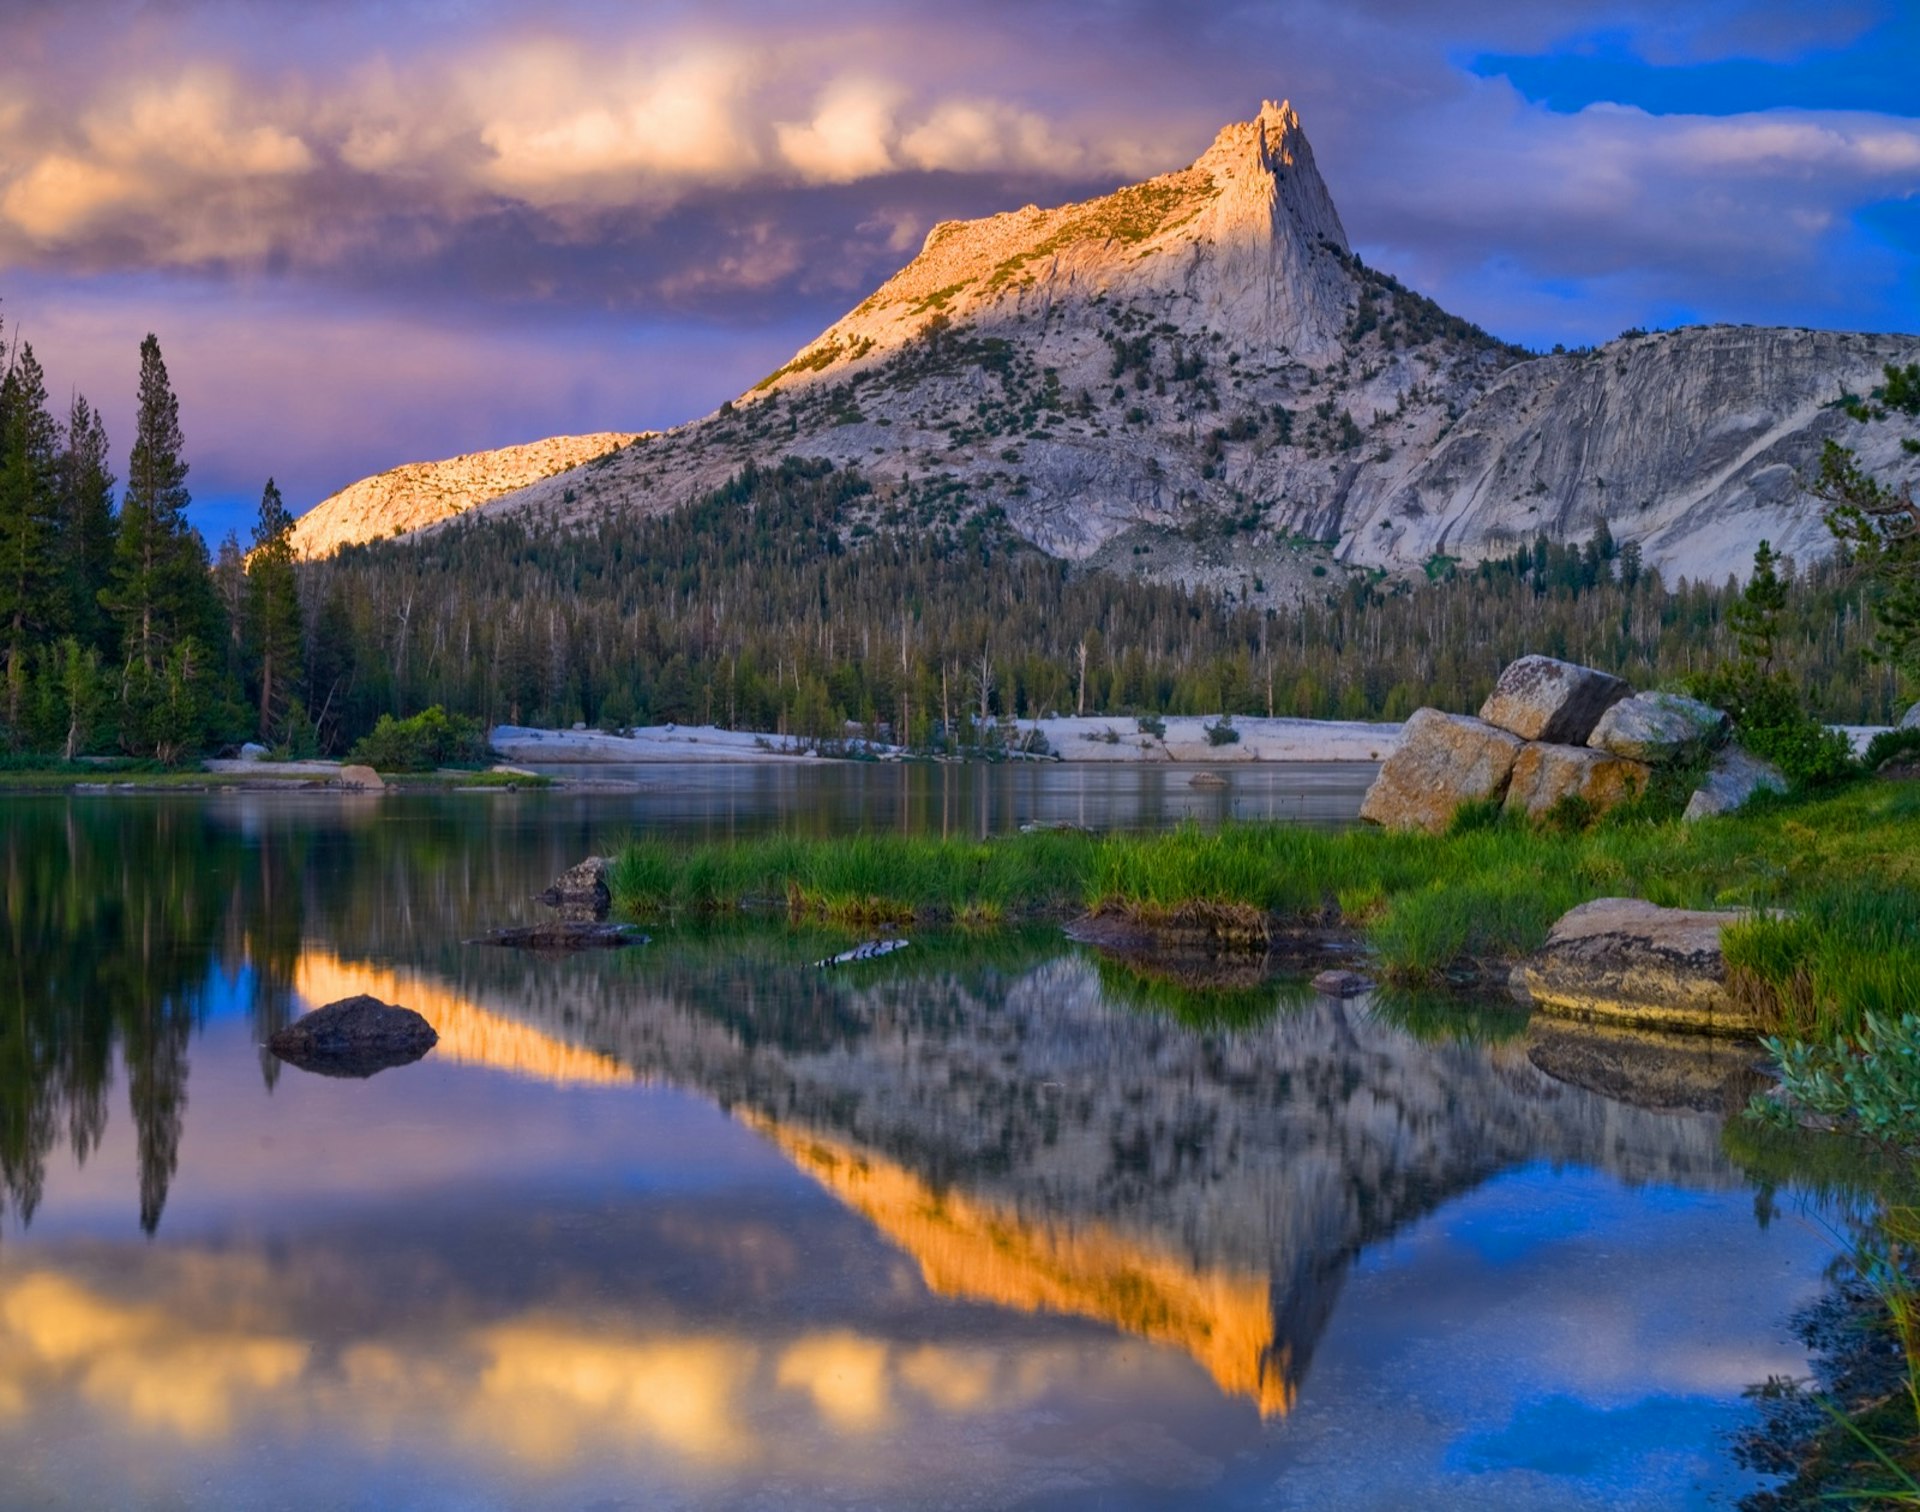 Snow-covered Cathedral Peak is reflected in a lake at Yosemite National Park at sunset